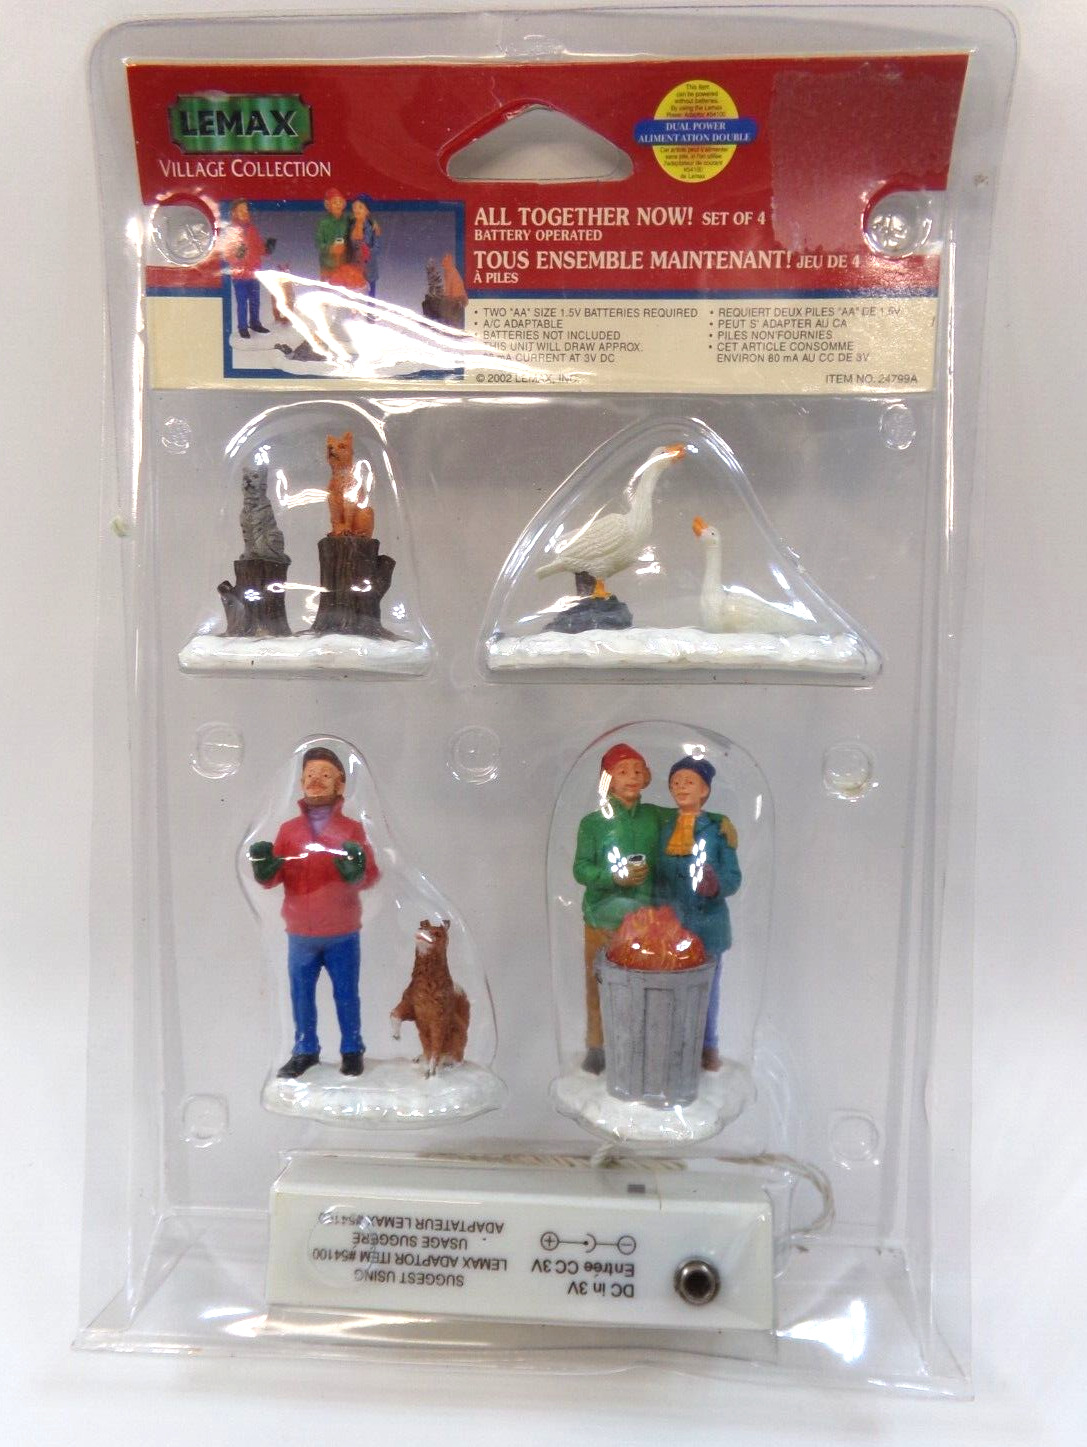 2002 Retired Lemax Village Christmas 24799A All Together Now Set of 4 New in Pkg